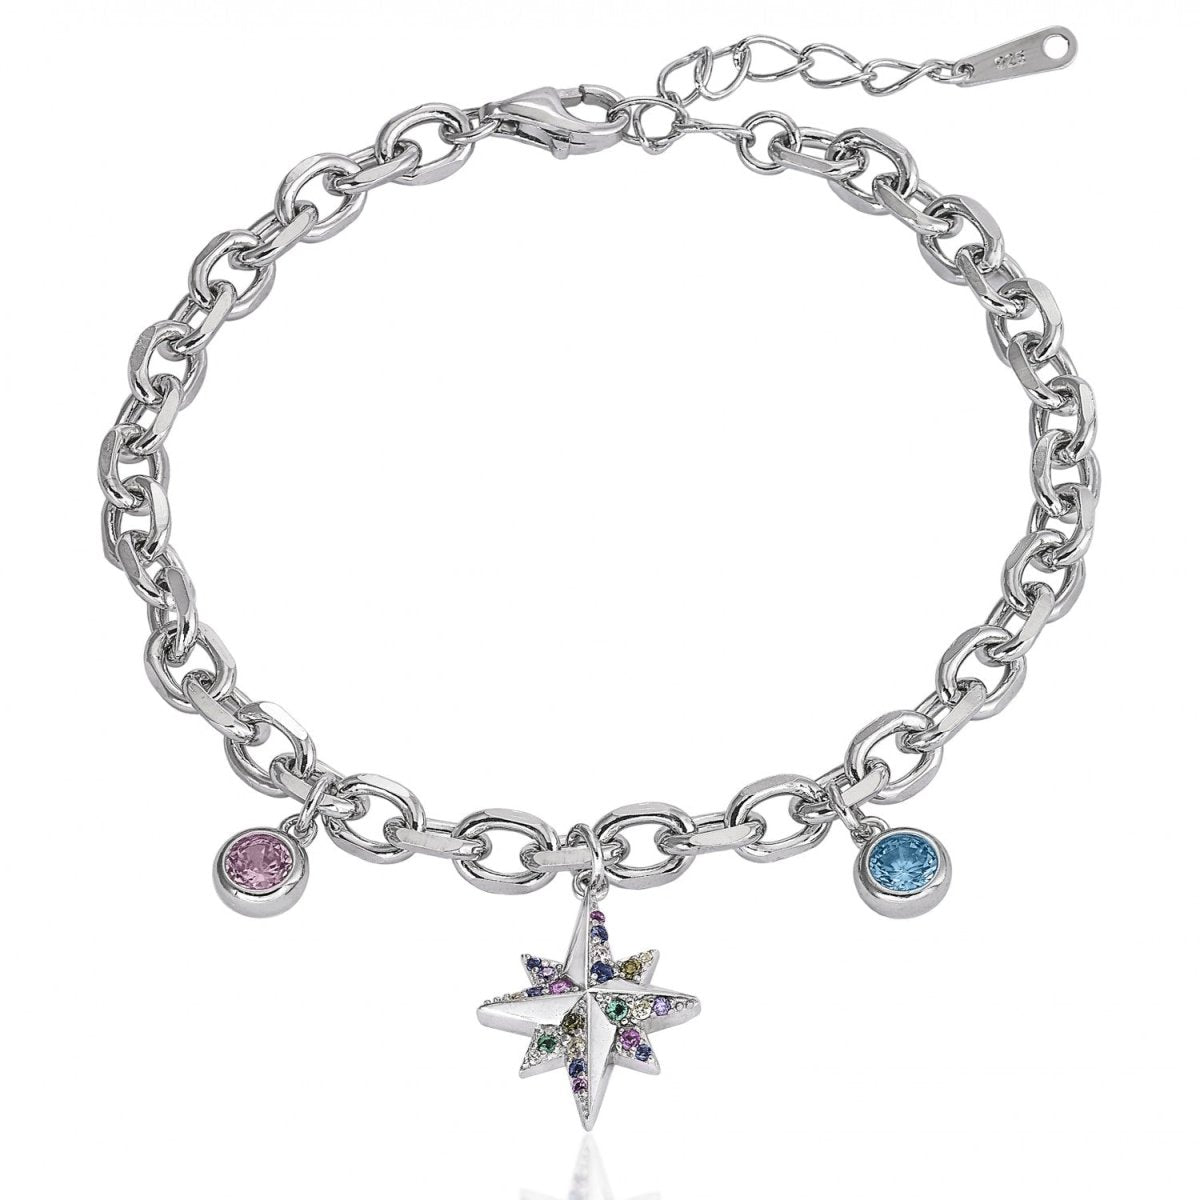 Bracelet - Bracelets with pendants in silver with blue and pink motifs